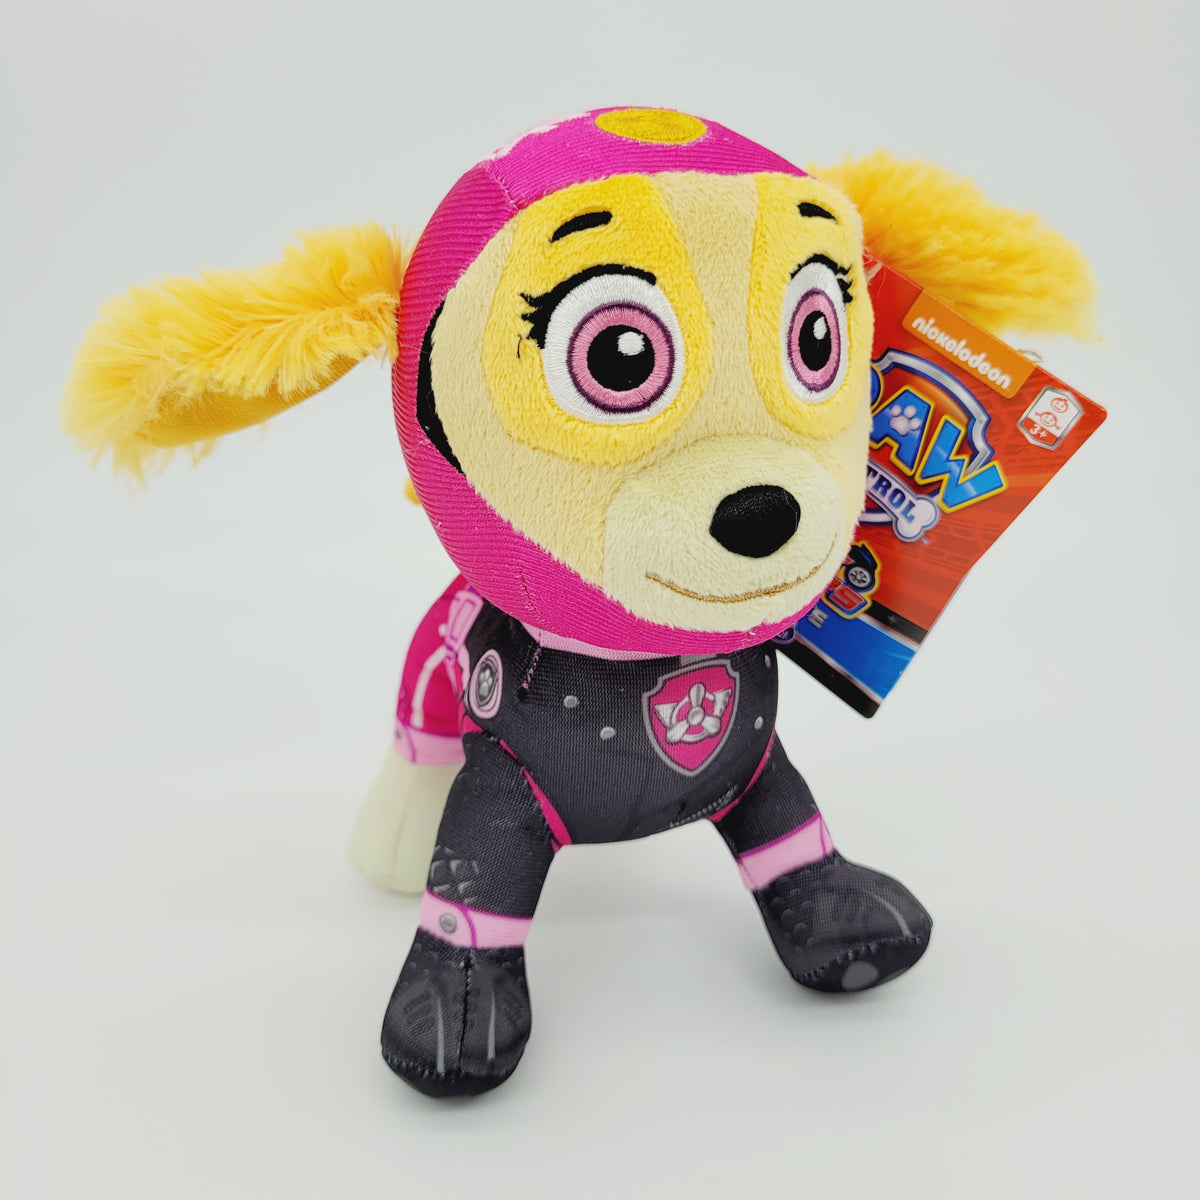 Paw Patrol Moto Pups Nickelodeon Plush Toy 8 inch Collectible by Spin –  Goodfind Toys